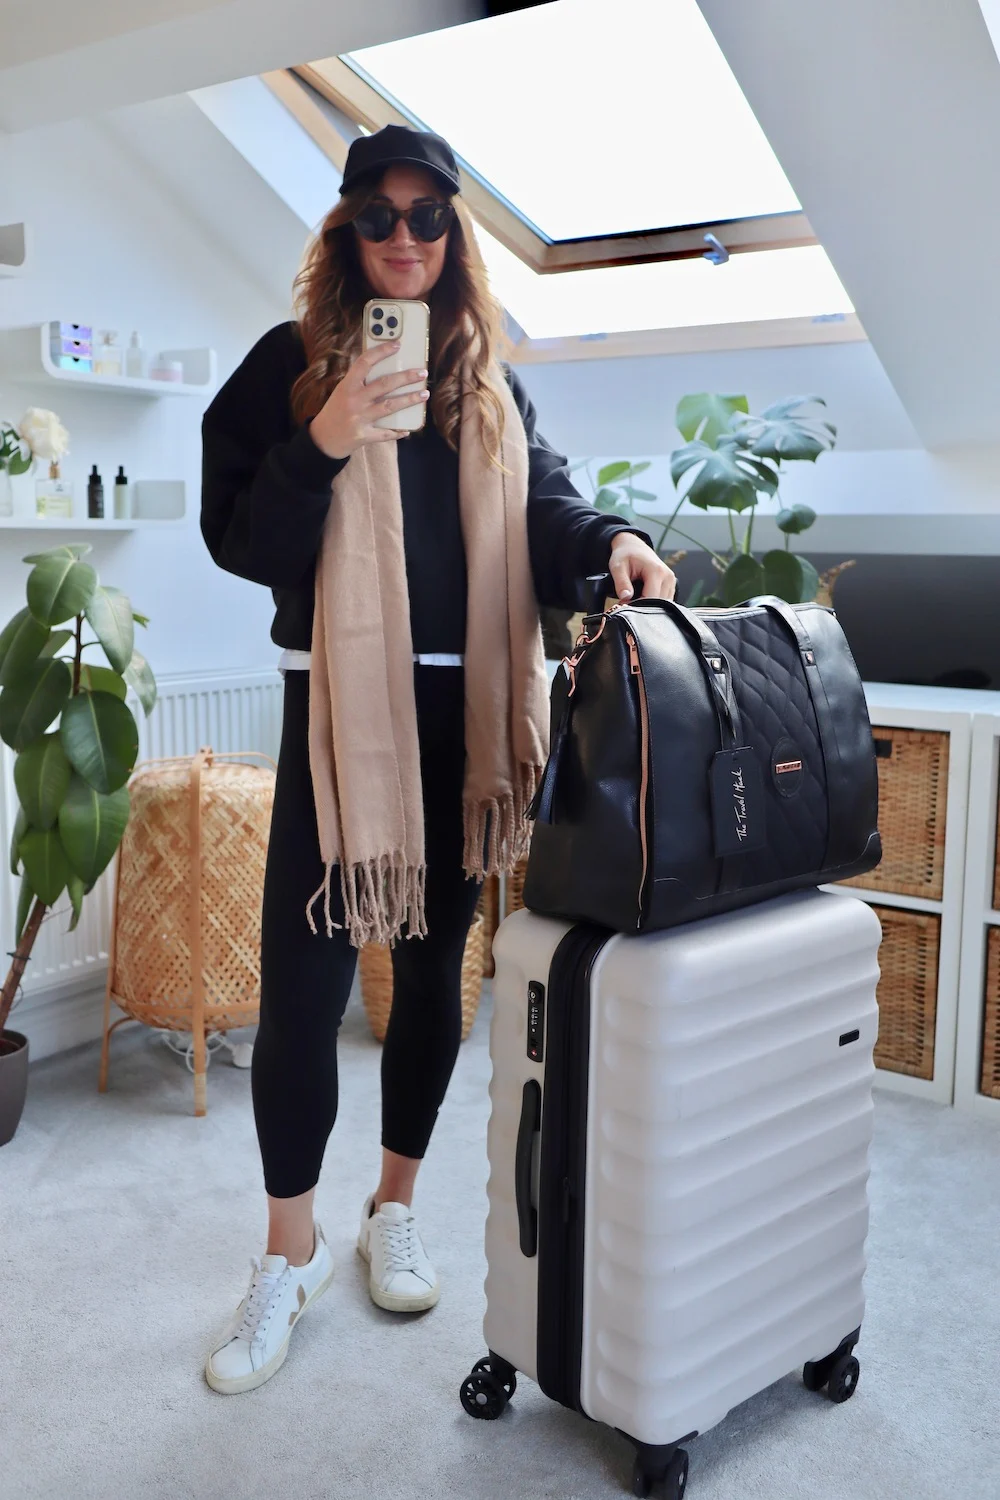 How to travel light: 12 travel hacks to travel light - The Travel Hack